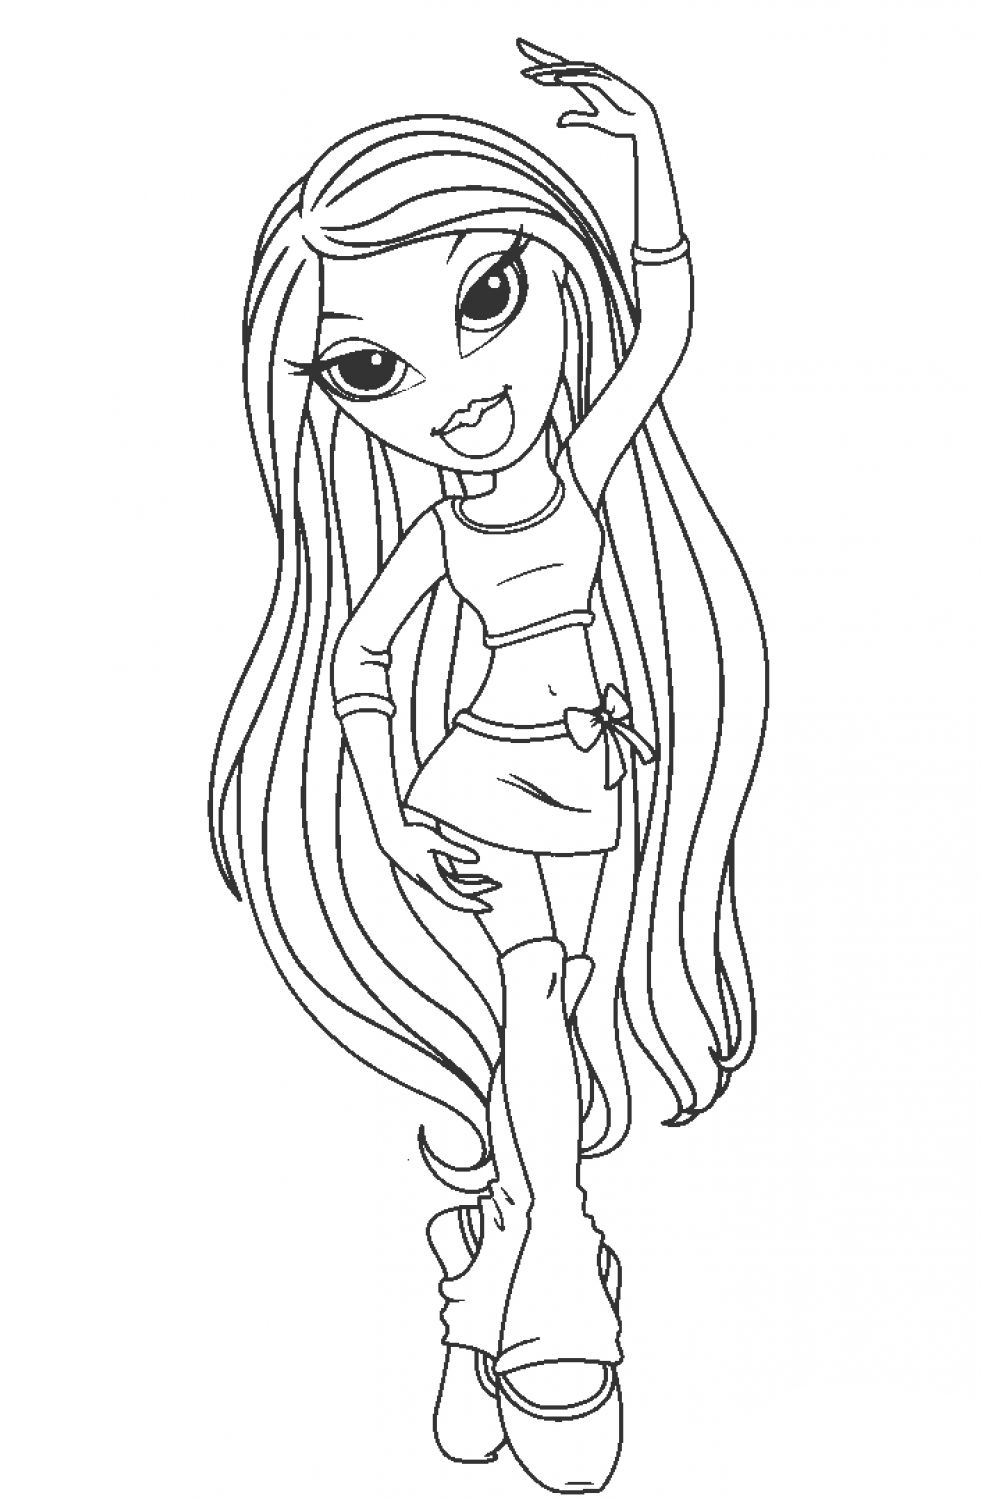 Bratz Dolls Coloring Pages. Print for free